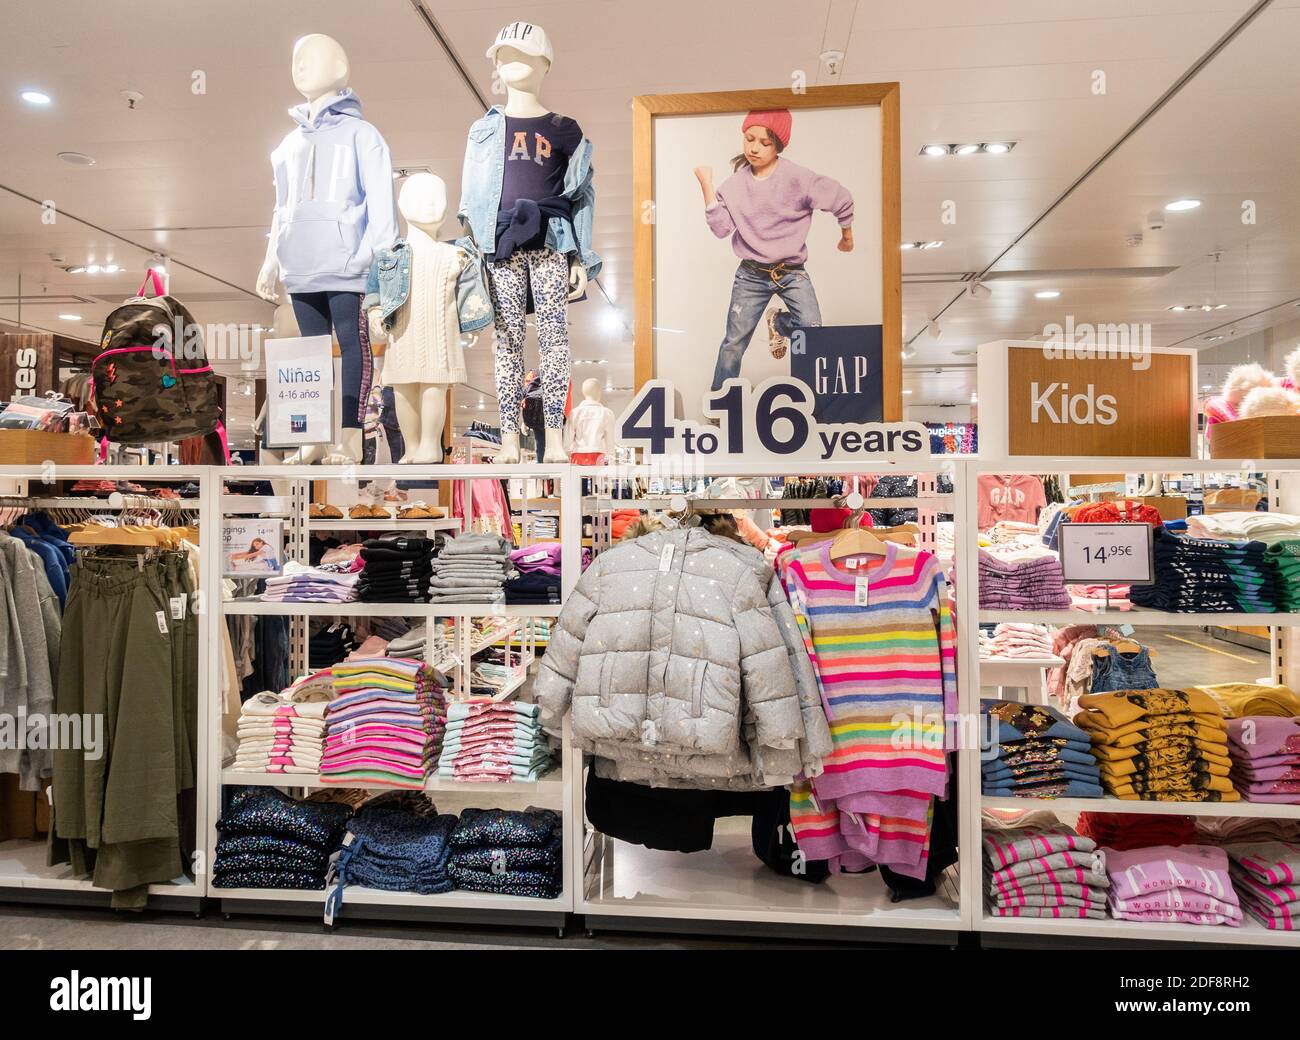 Gap Kids Clothes High Resolution Stock Photography and Images - Alamy